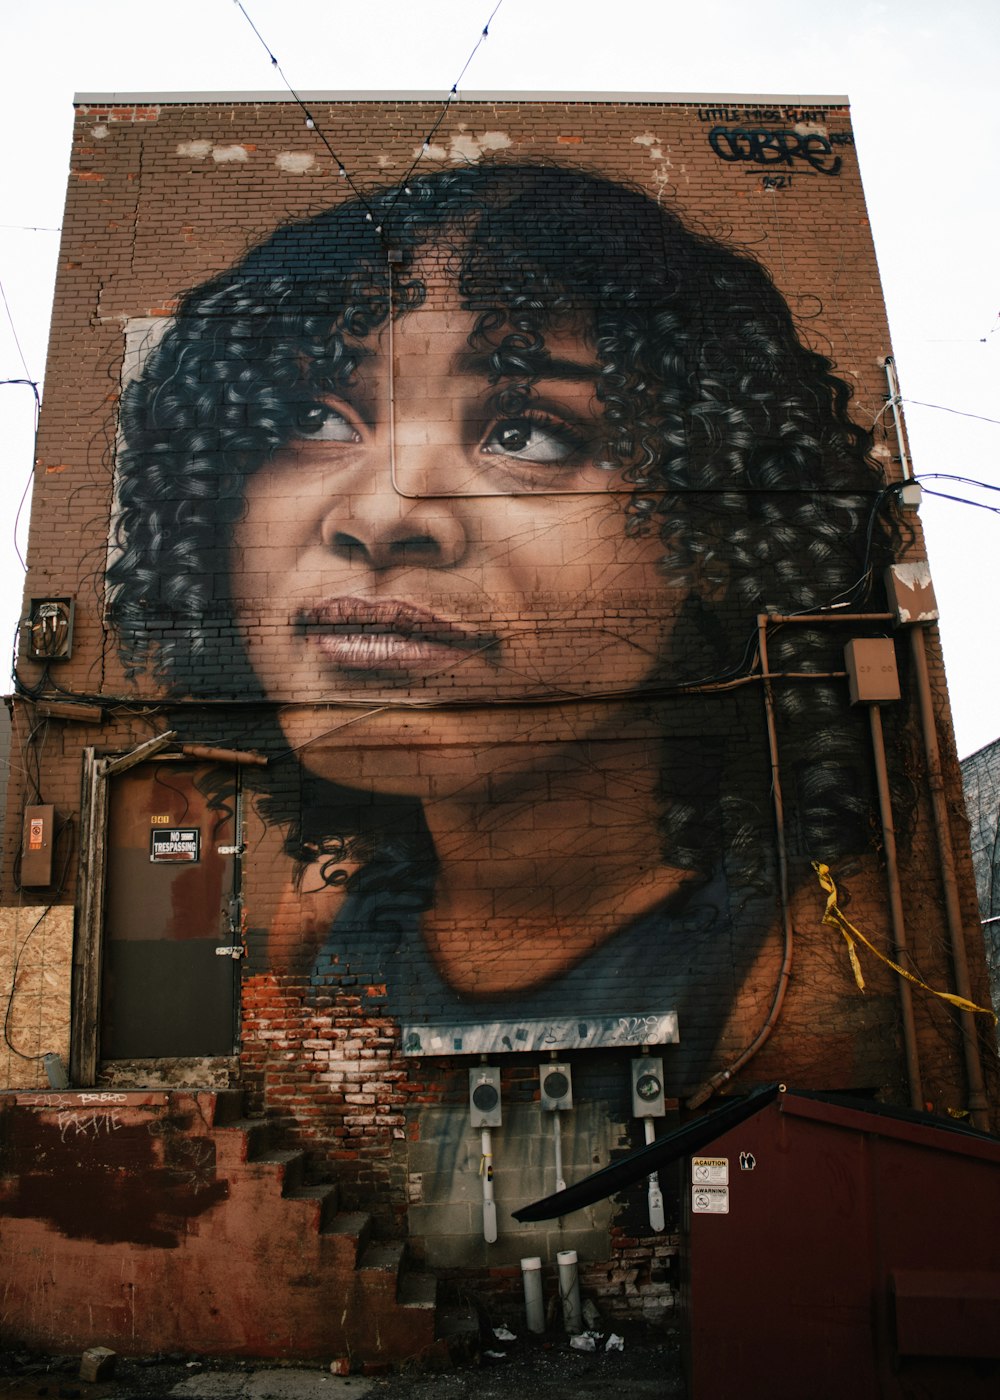 a painting of a woman on the side of a building